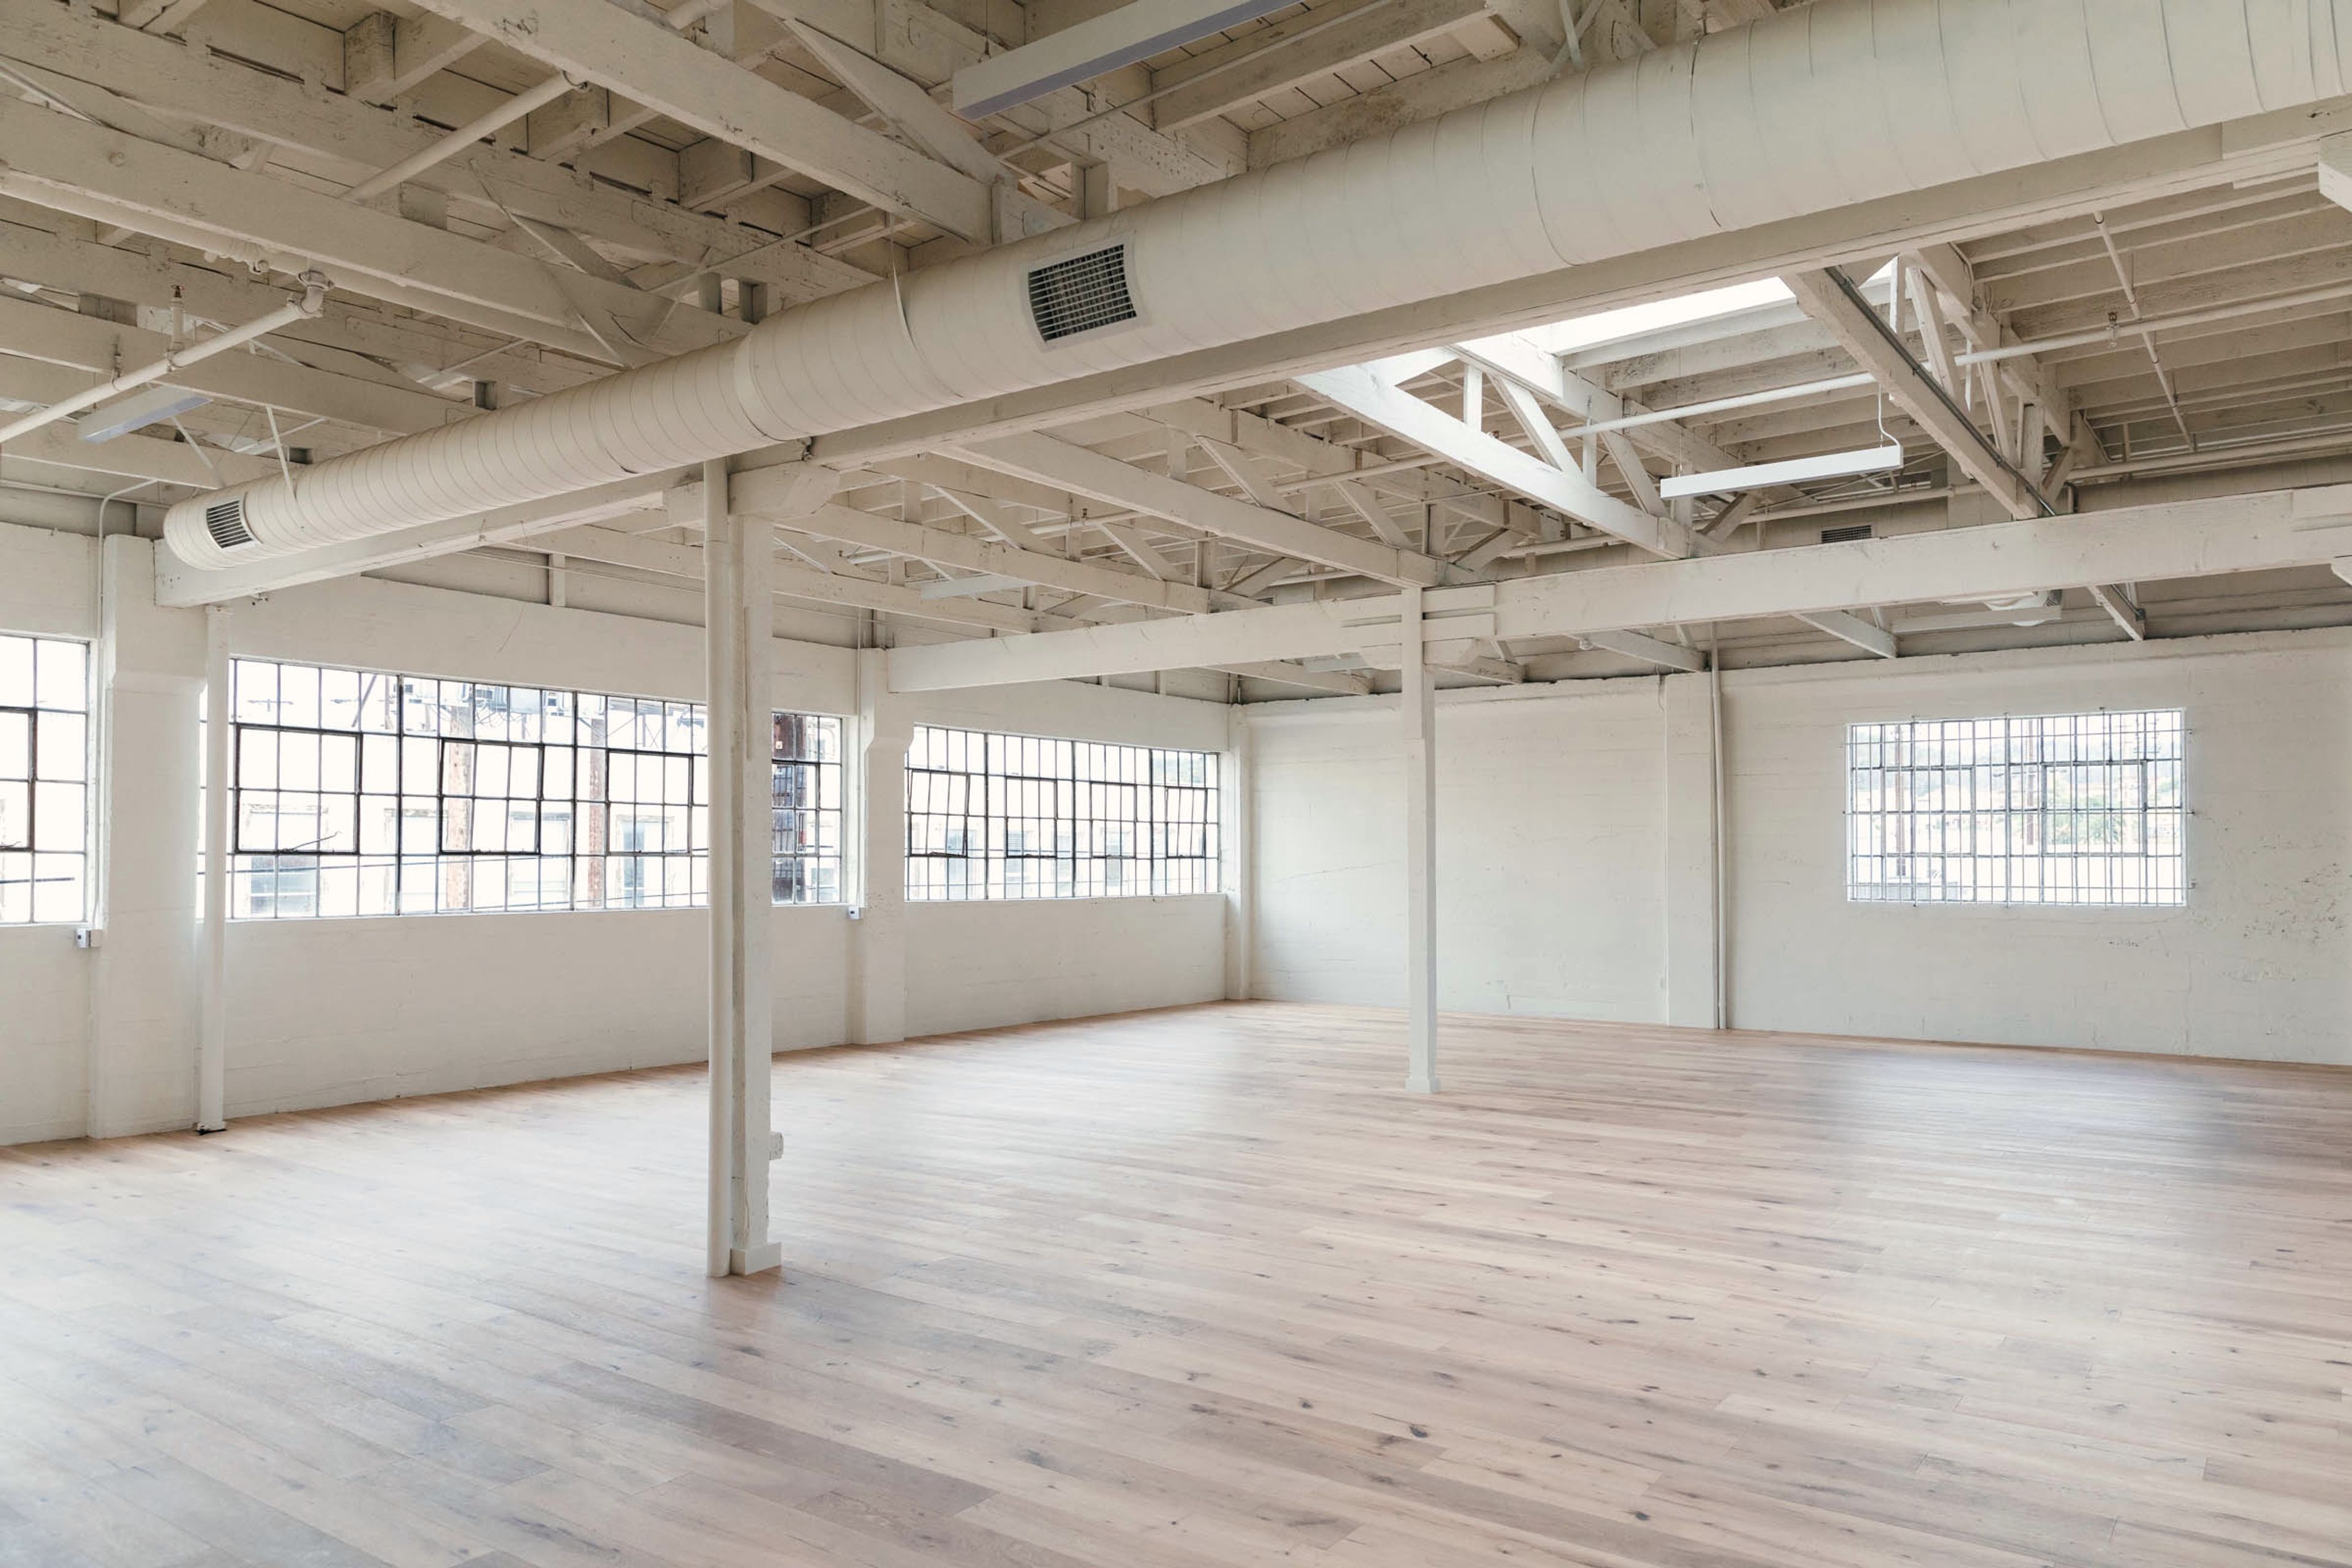 Over 4,000 s.f. of open warehouse space configured for photoshoots and events